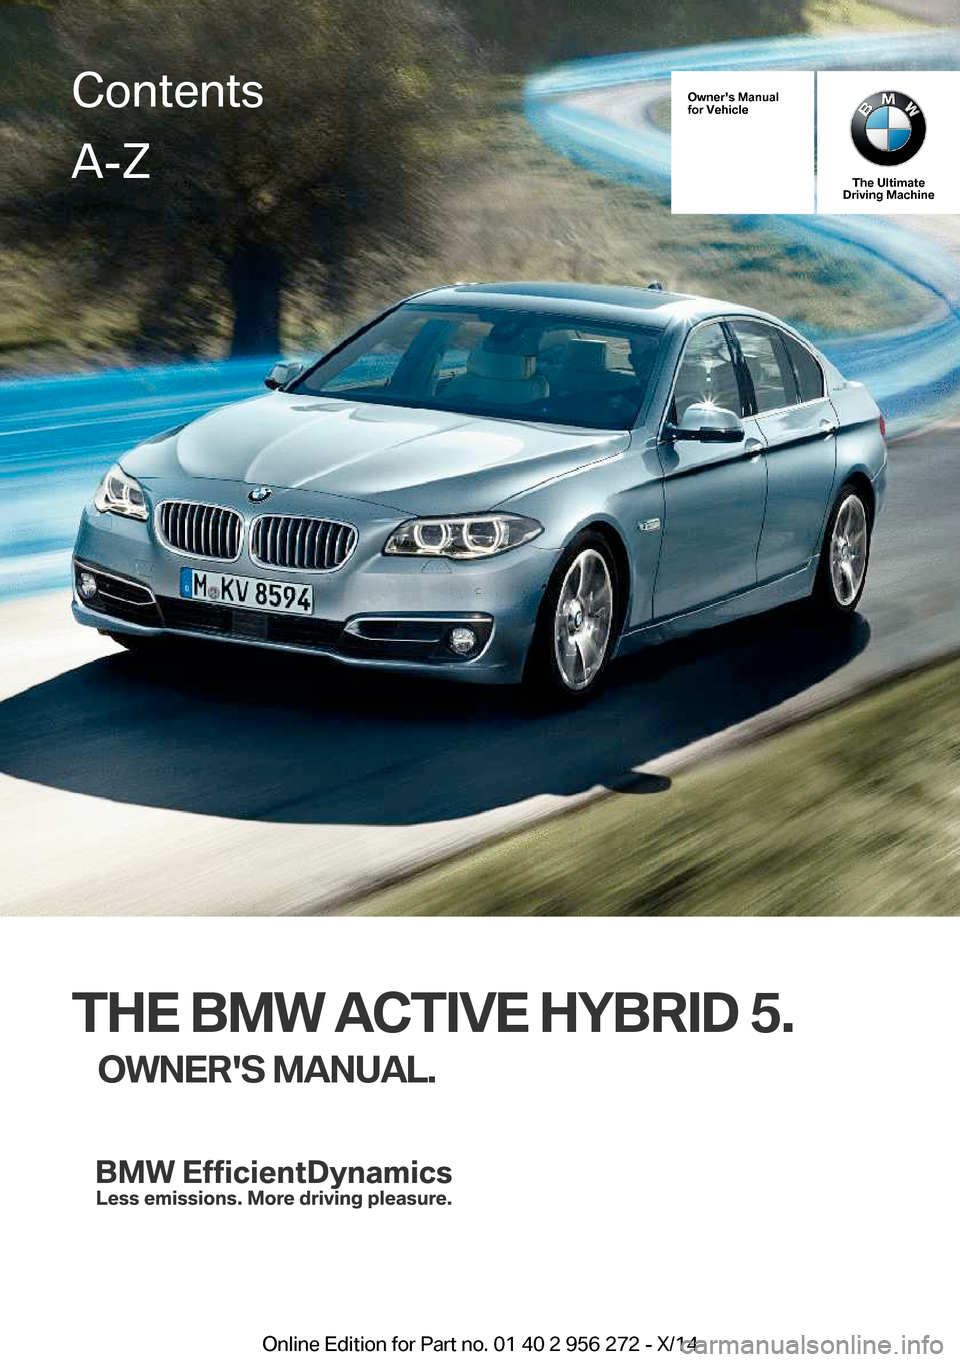 BMW ACTIVE HYBRID 5 2014 F10H Owners Manual Owners Manual
for Vehicle
The Ultimate
Driving Machine
THE BMW ACTIVE HYBRID 5.
OWNERS MANUAL.
ContentsA-Z
Online Edition for Part no. 01 40 2 956 272 - X/14   